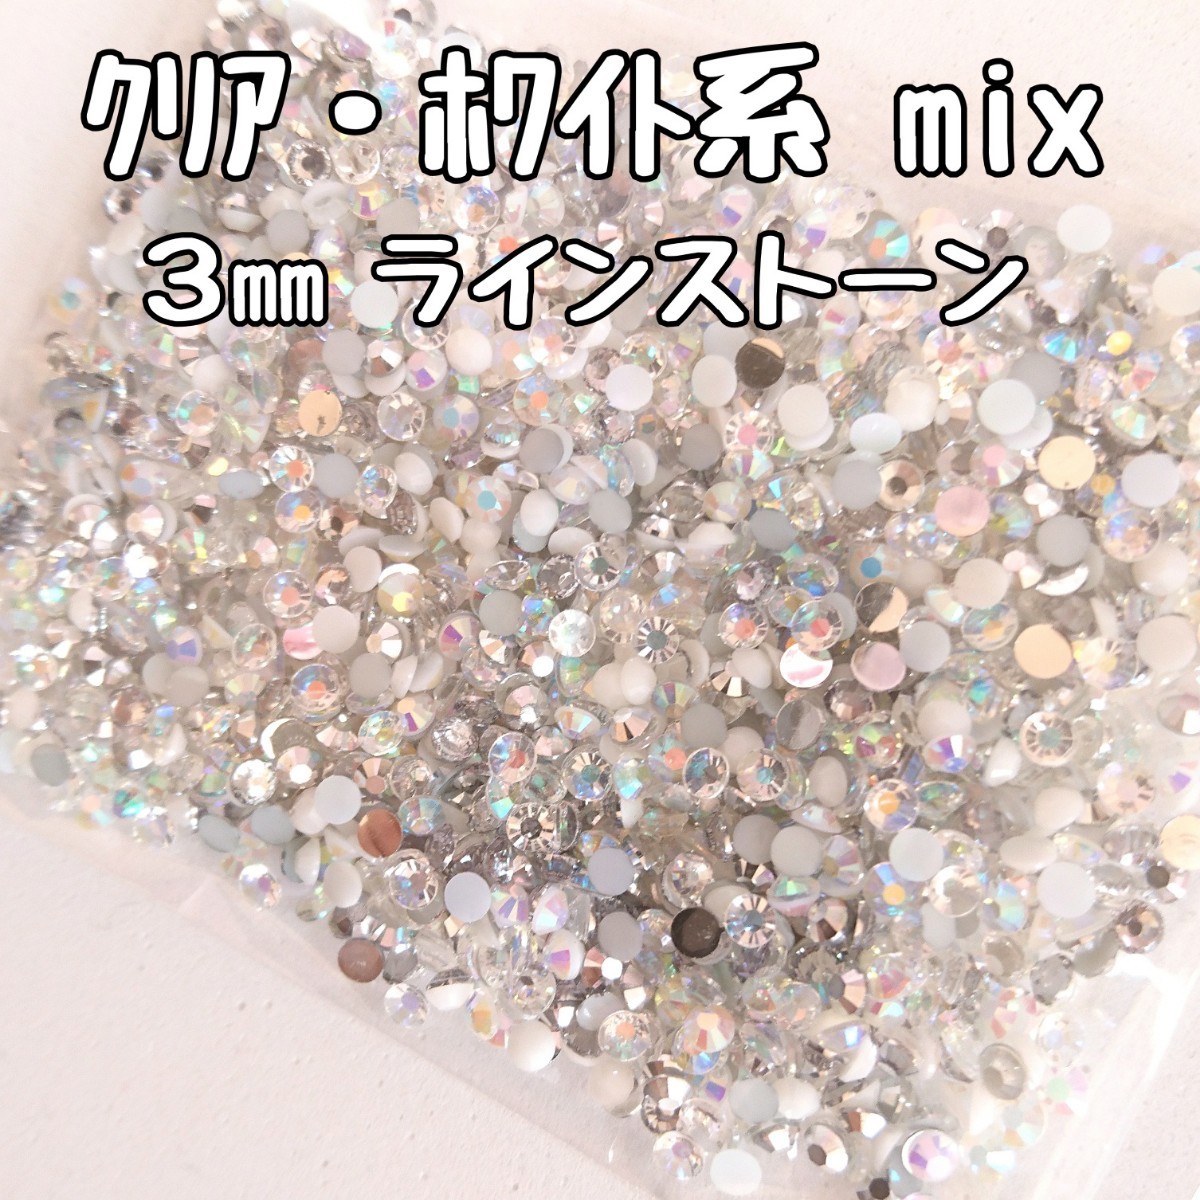  rhinestone 3mm( clear * white group mix) approximately 2000 bead | deco parts nails * anonymity delivery 